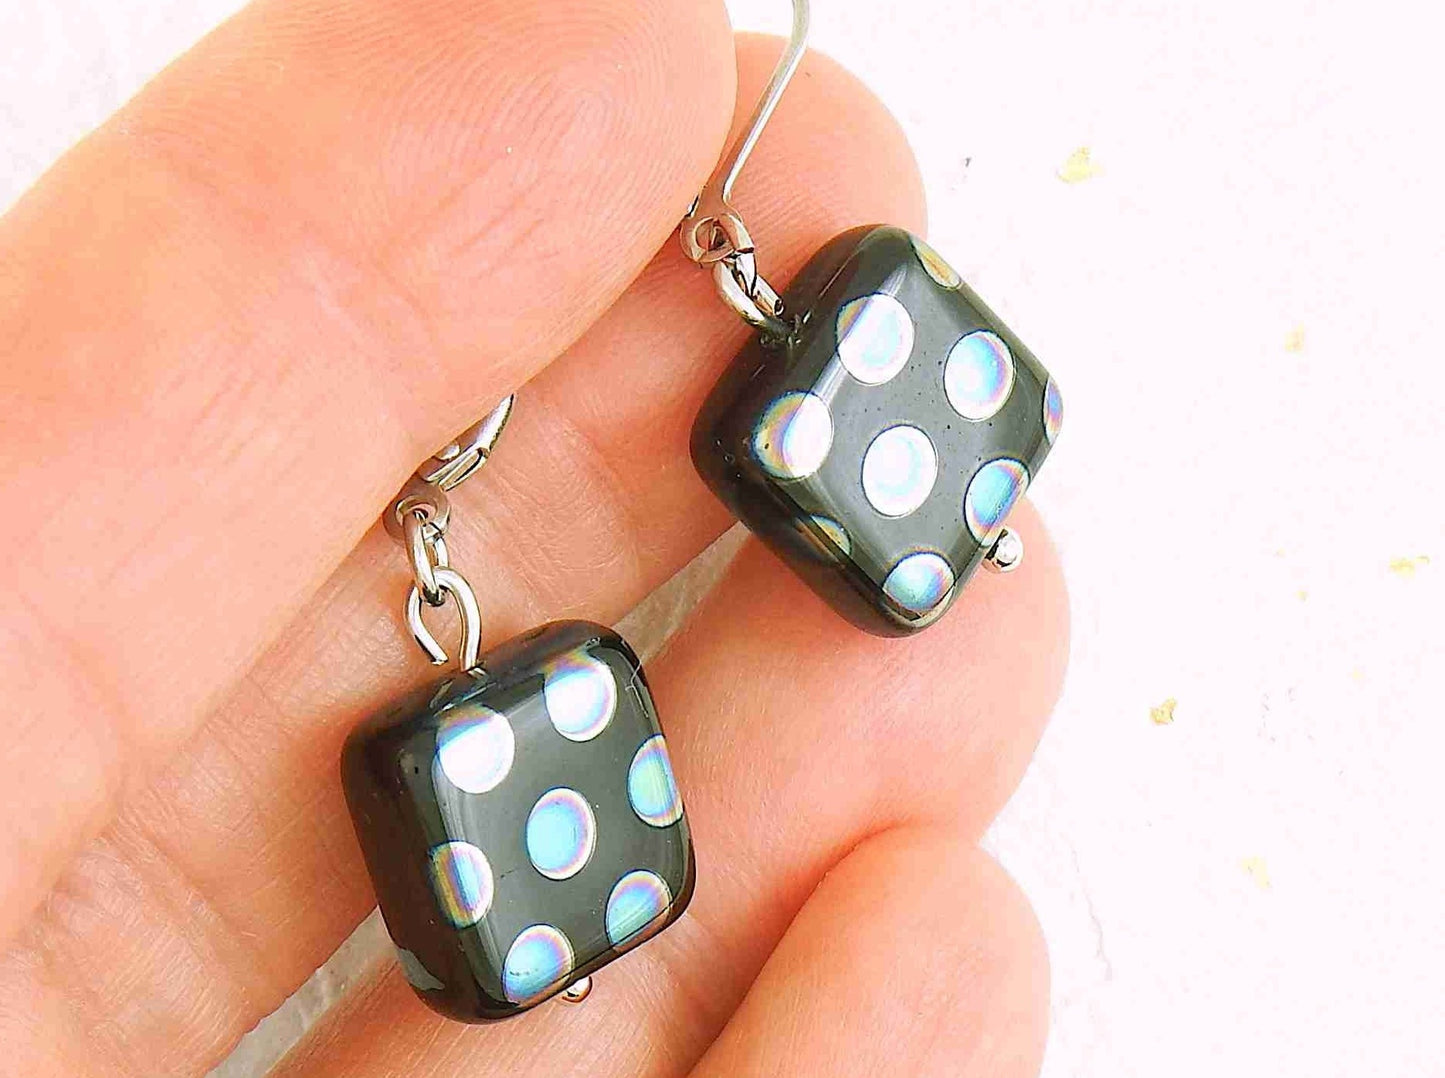 Short earrings with small shiny black Czech glass squares, small multicolored or copper dots, silver or rose gold-toned stainless steel lever back hooks